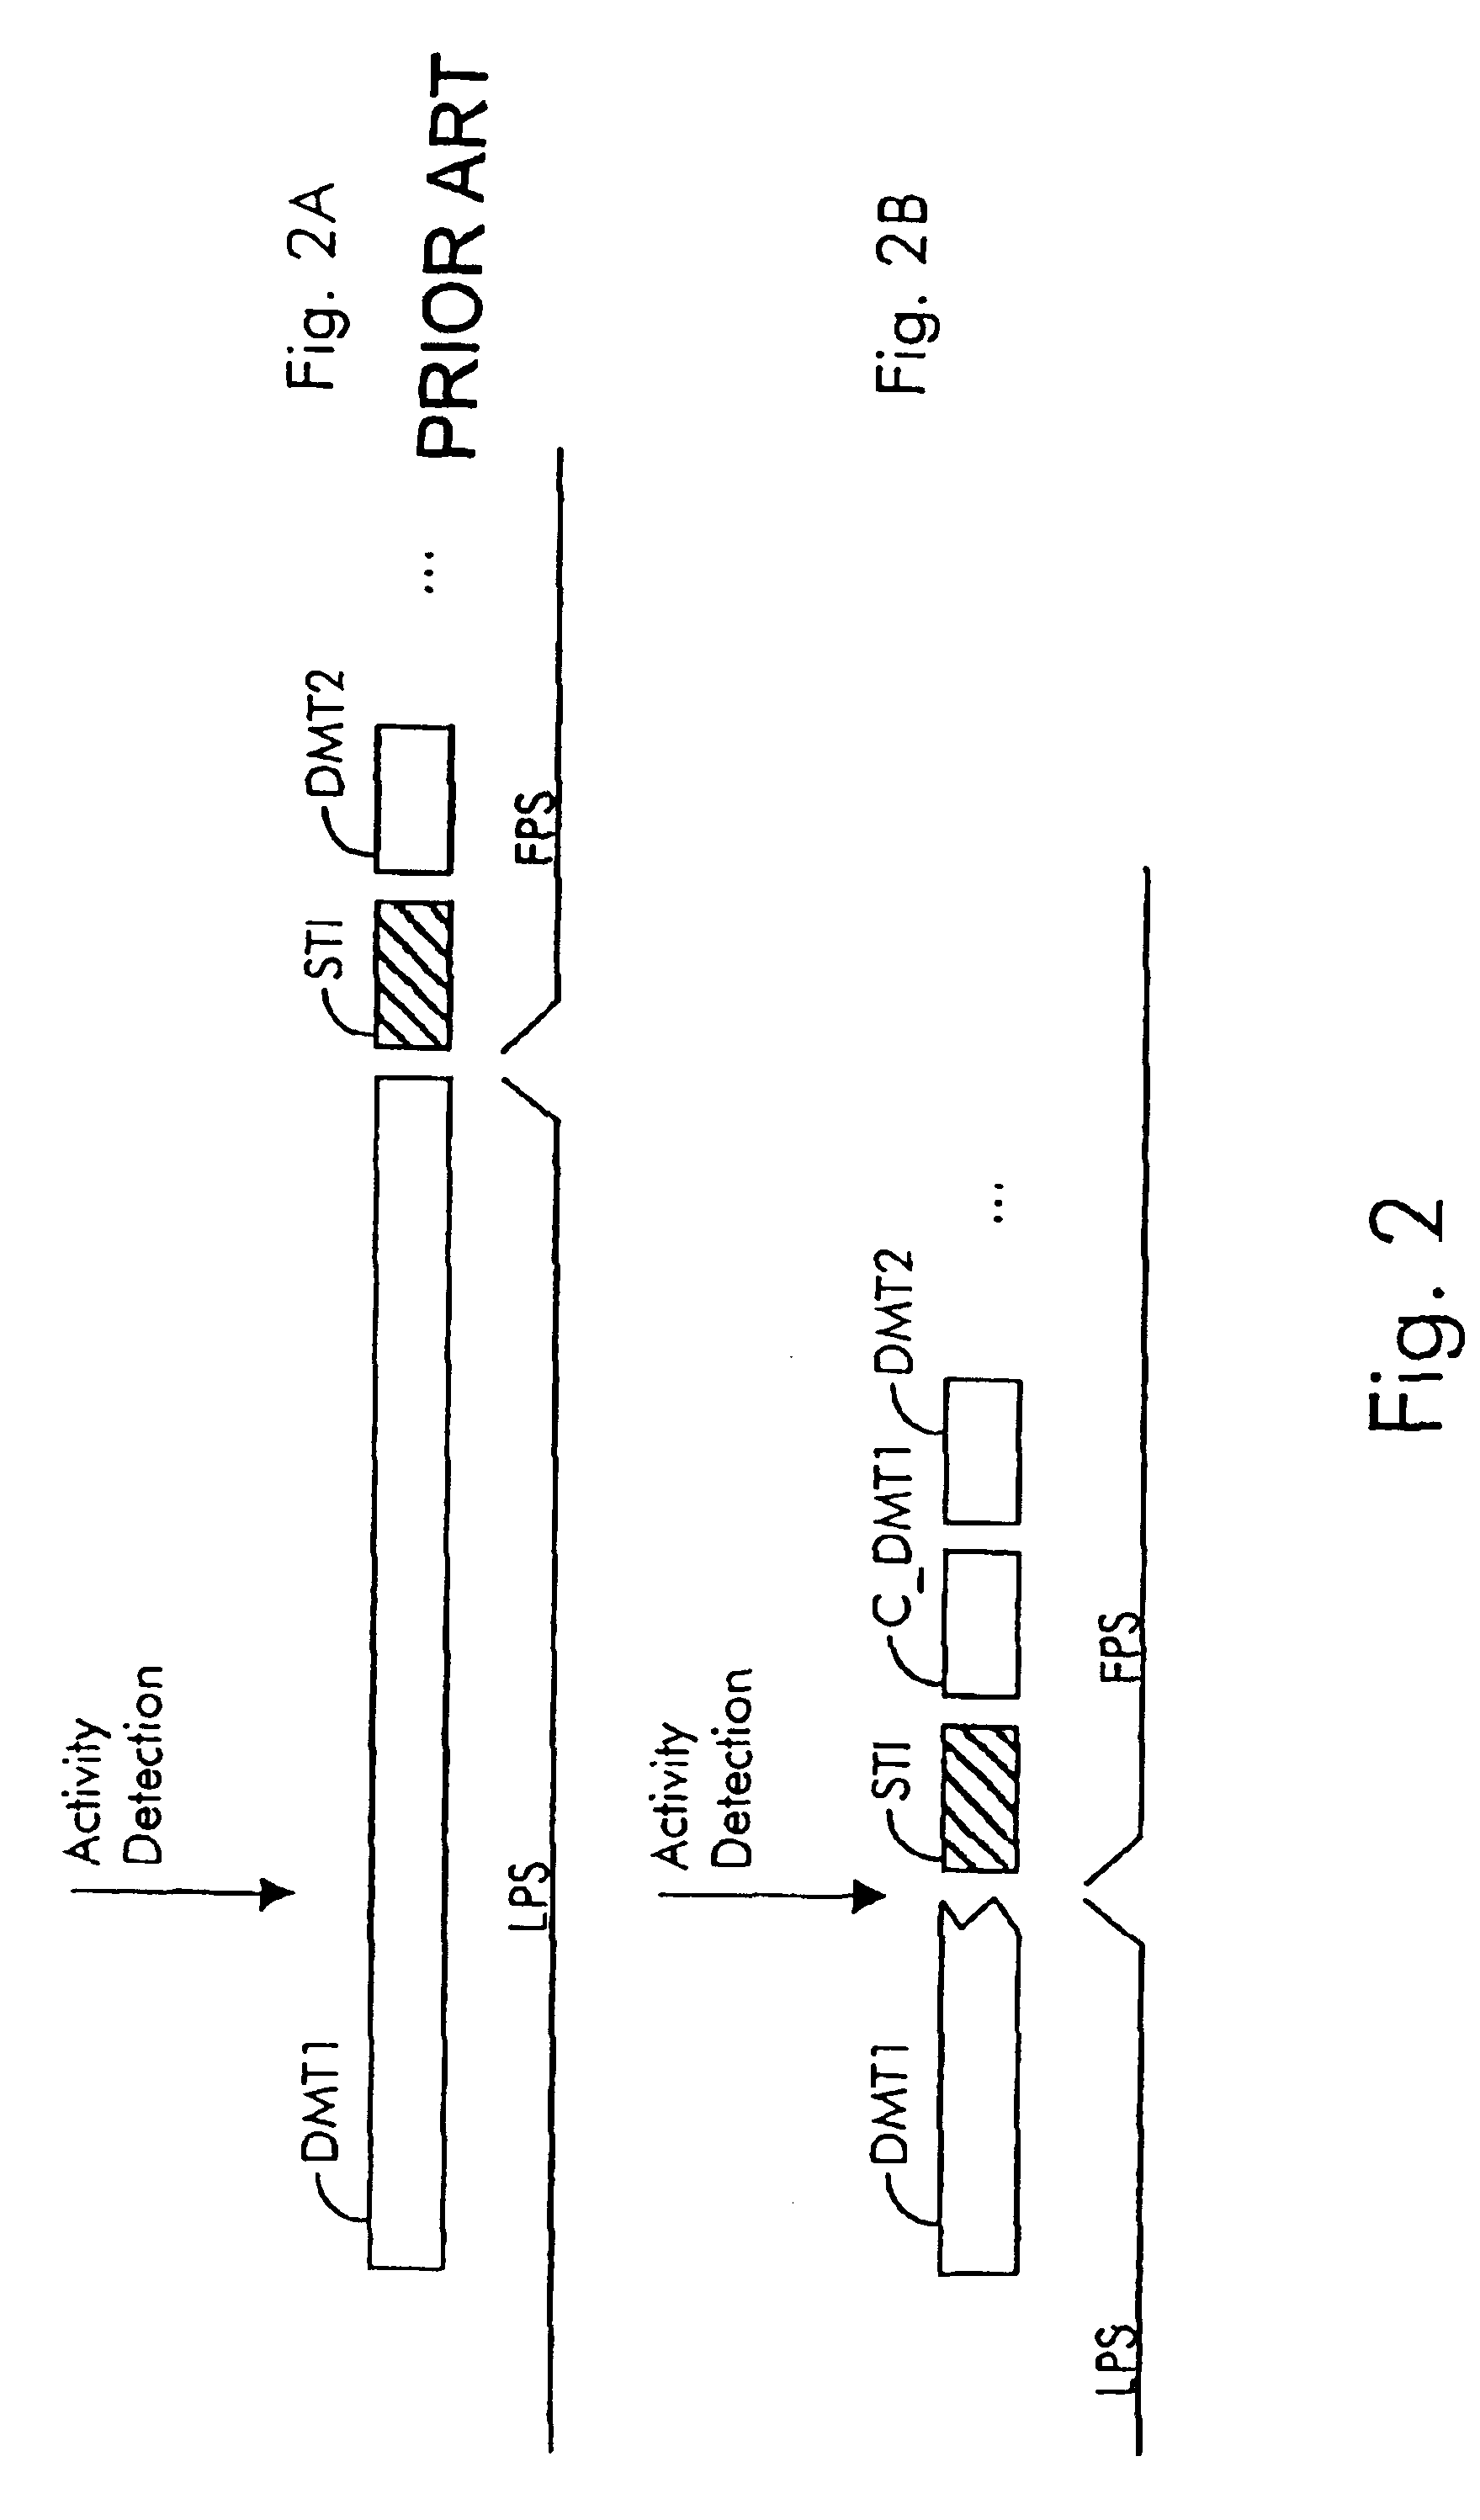 Method and arrangements for fast transition from a low power state to a full power state in a communication system